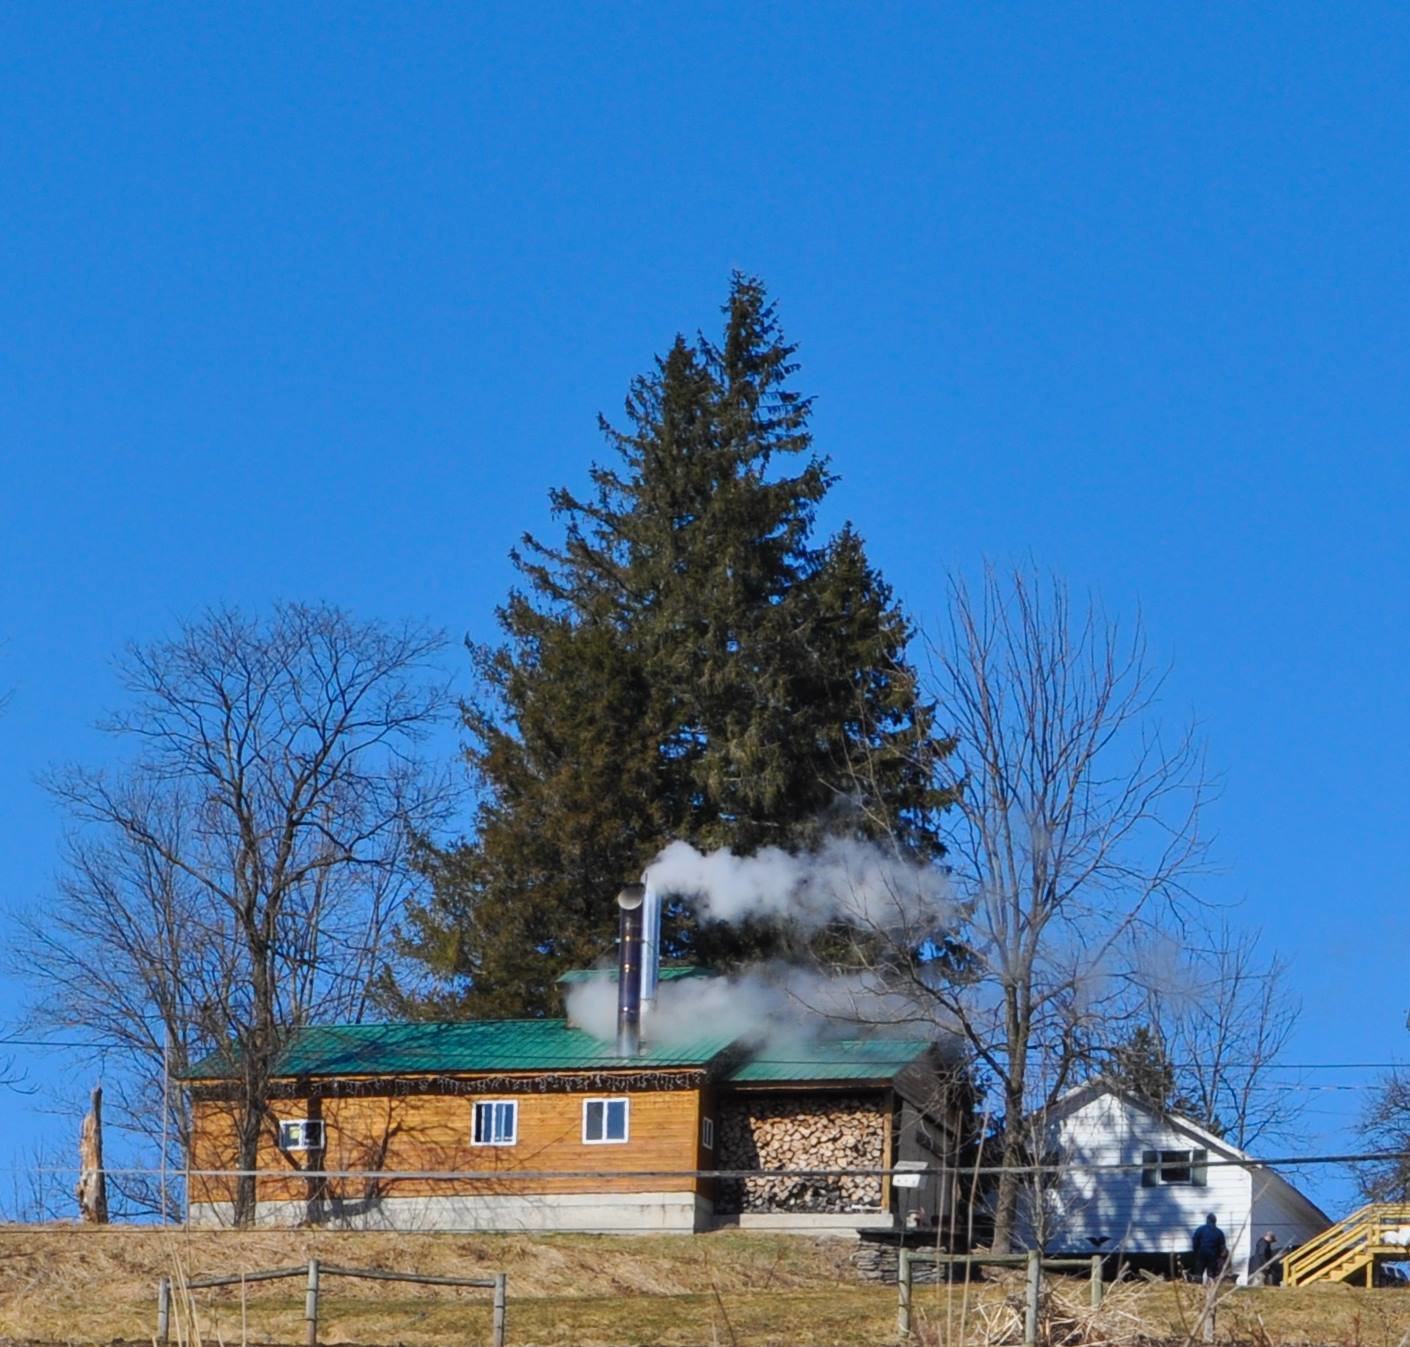 See the plumes of steam rising from the sugar shack at the Diehl Homestead Farm? That’s why you don’t make maple syrup in your kitchen.